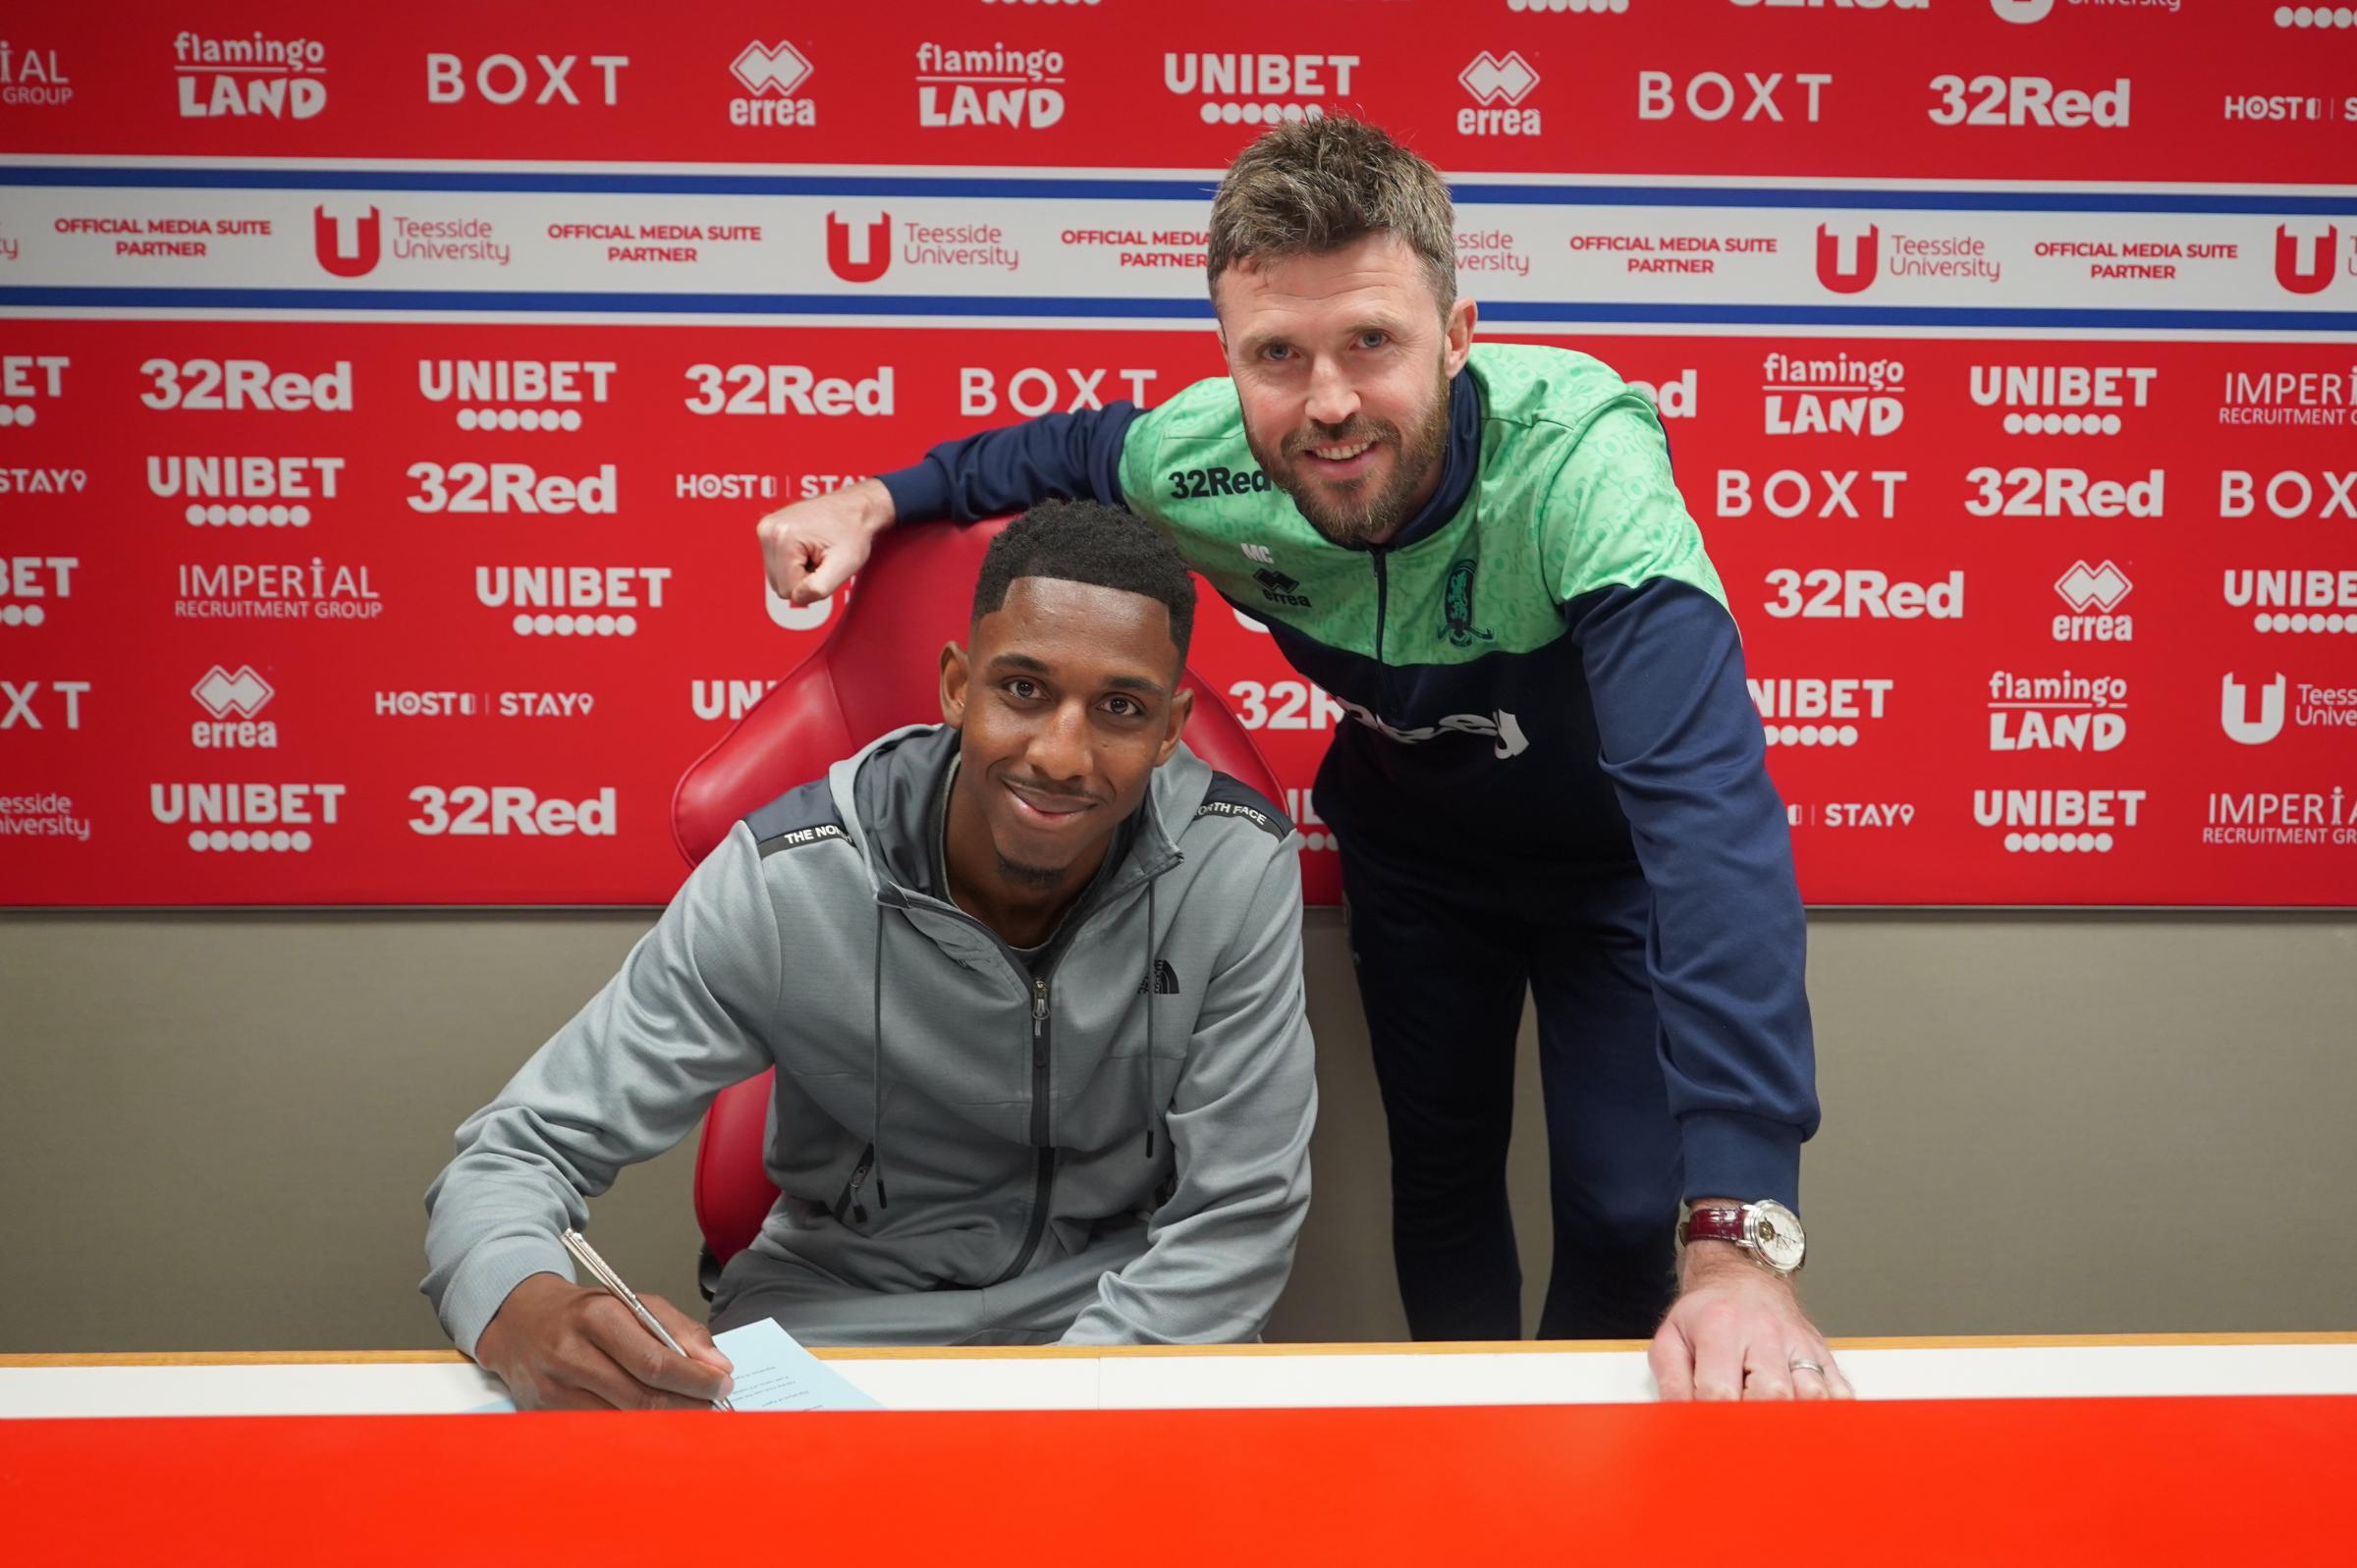 Isaiah Jones signs a new long-term contract with Middlesbrough